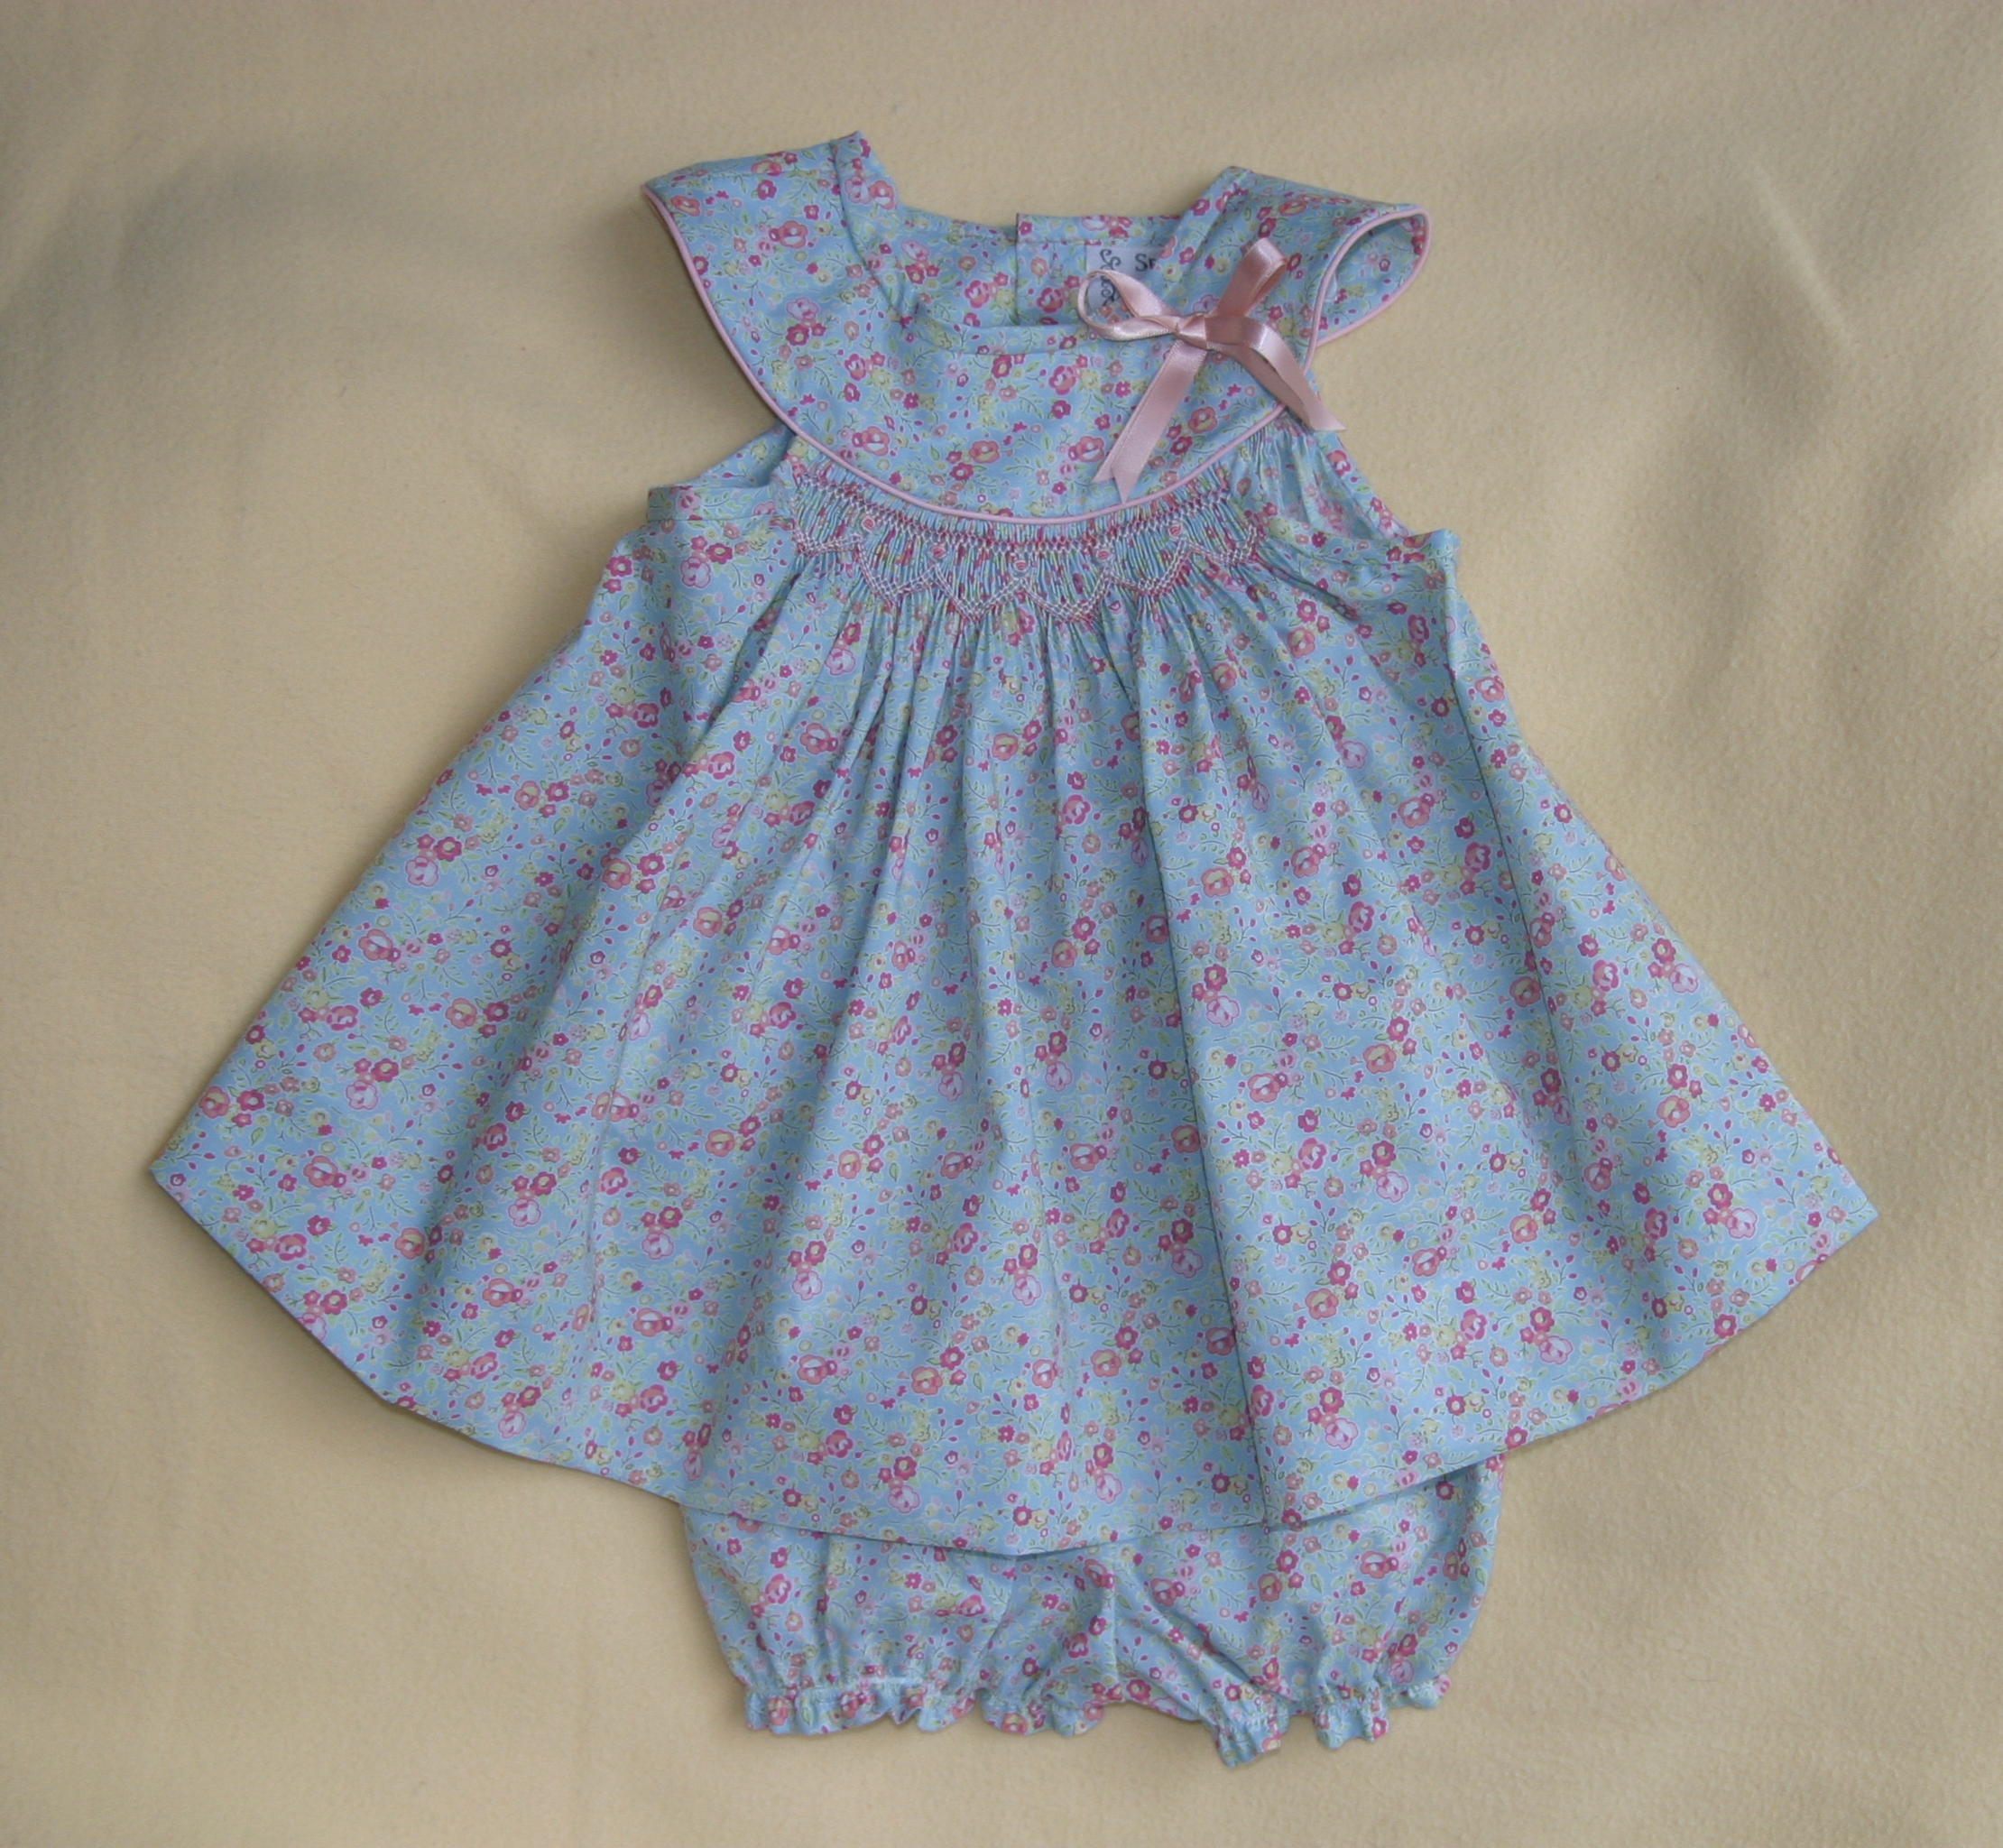 Smocked Frocks - Beautiful Hand Made Clothes for babies and children